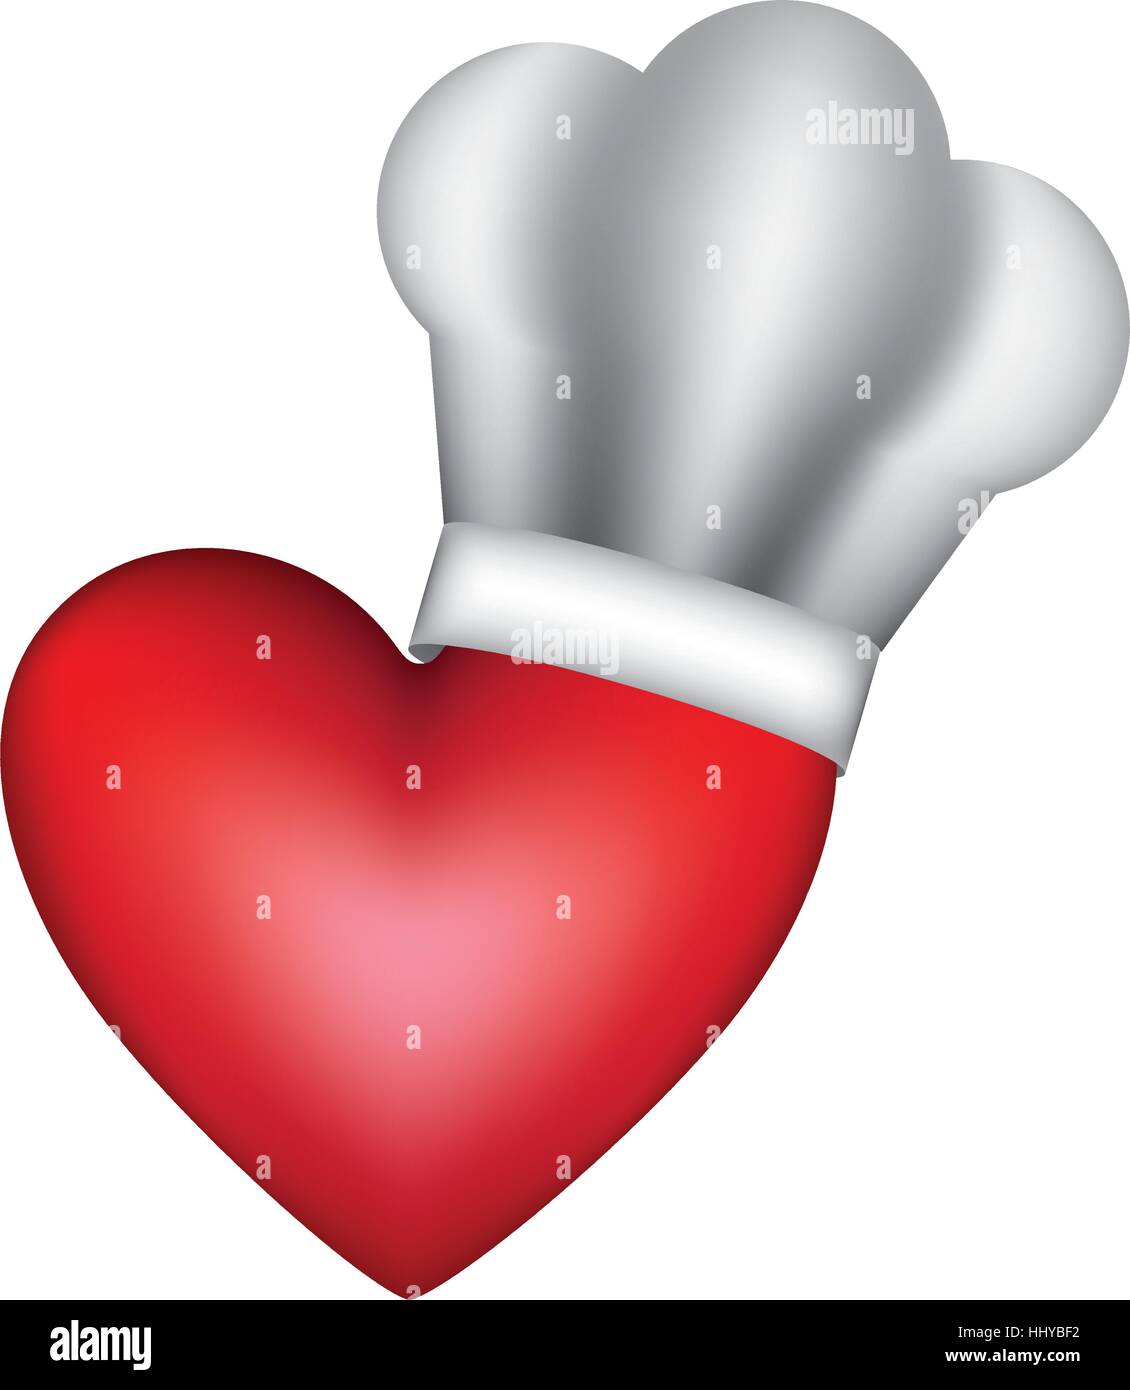 Download realistic silhouette of chefs hat with heart vector ...